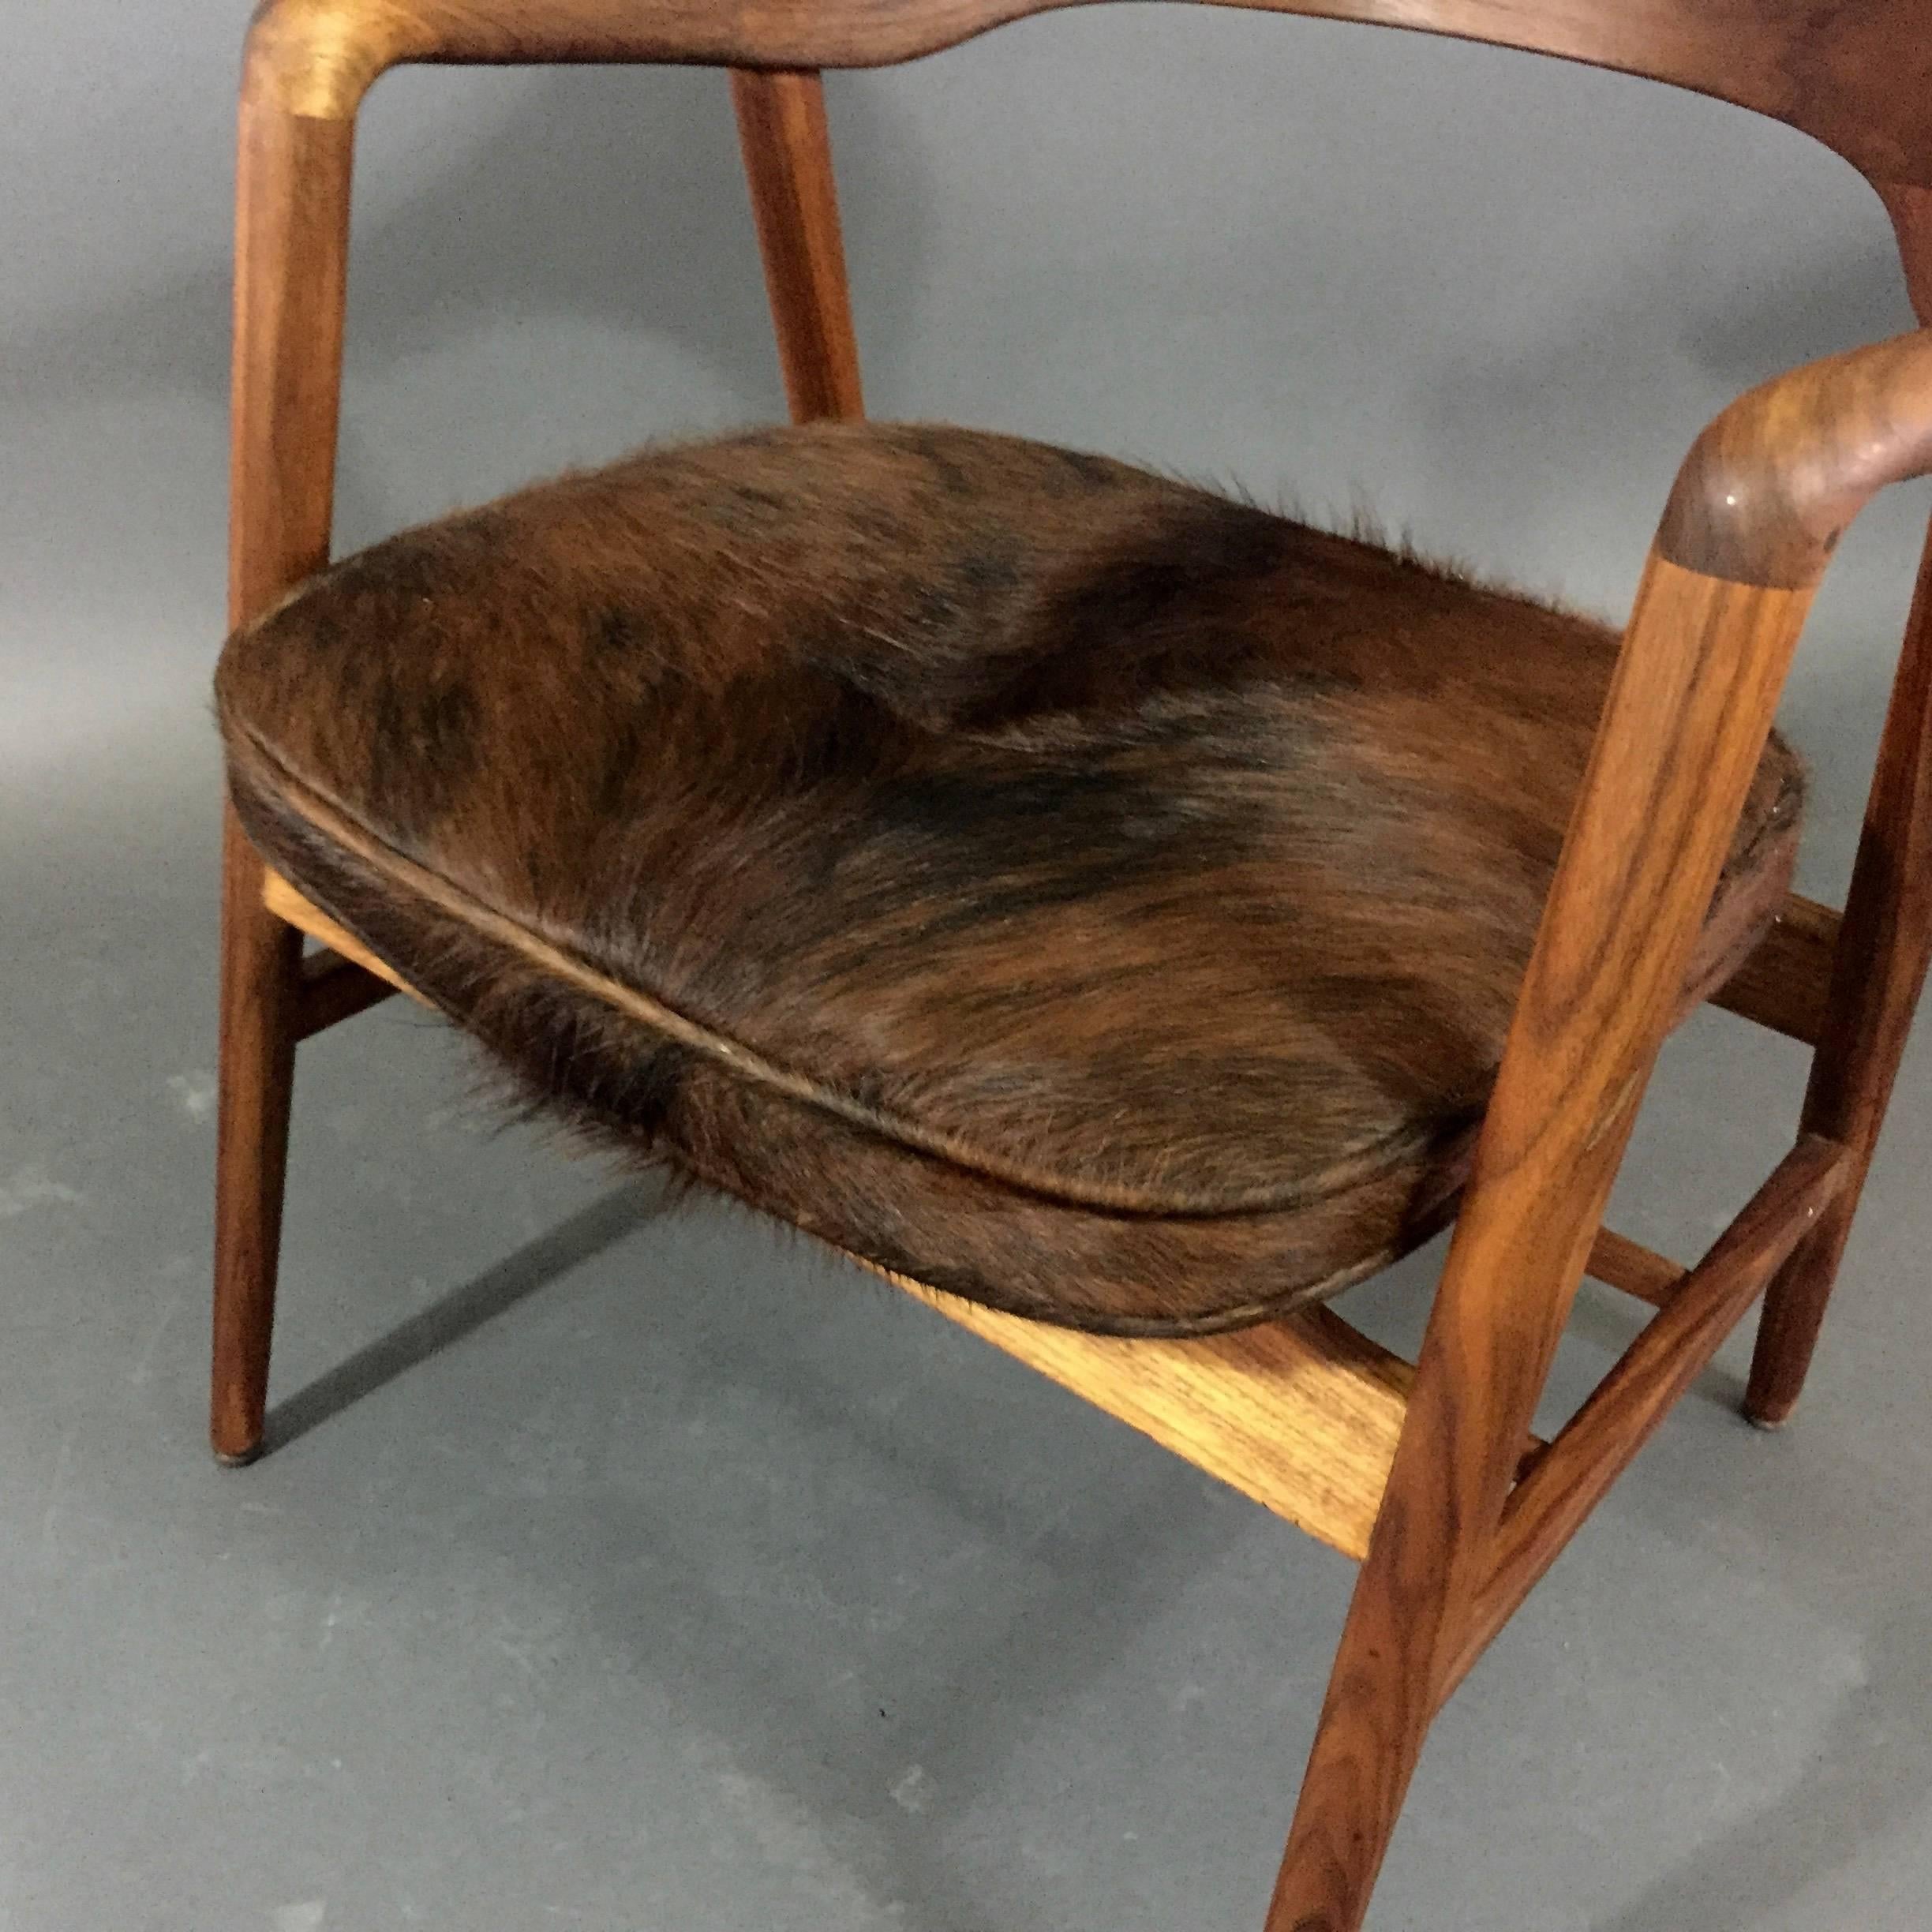 A few versions of this chair have been made as either dining chairs or a desk chair by the Wayland NY based W.H. Gunlocks company. This version is gorgeous solid sculpted walnut with a magazine rack to the underside. Recently upholstered in a luxe